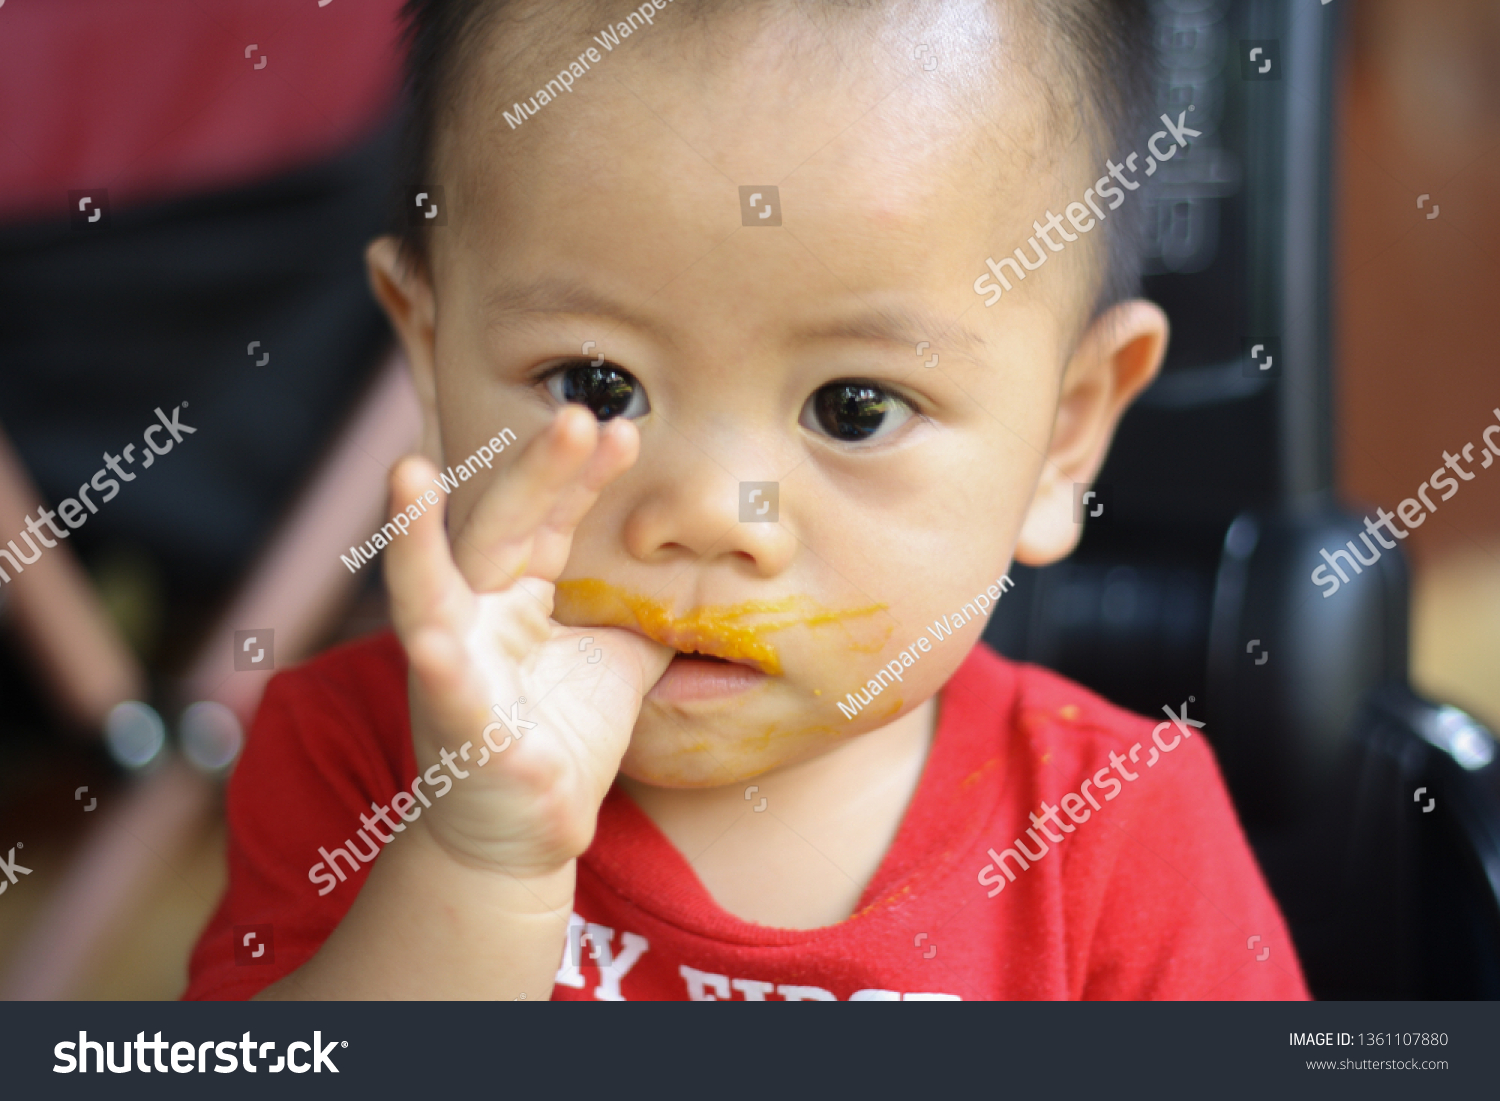 portrait of a little Asian boy eating a baby with a hand and a grimy face #1361107880